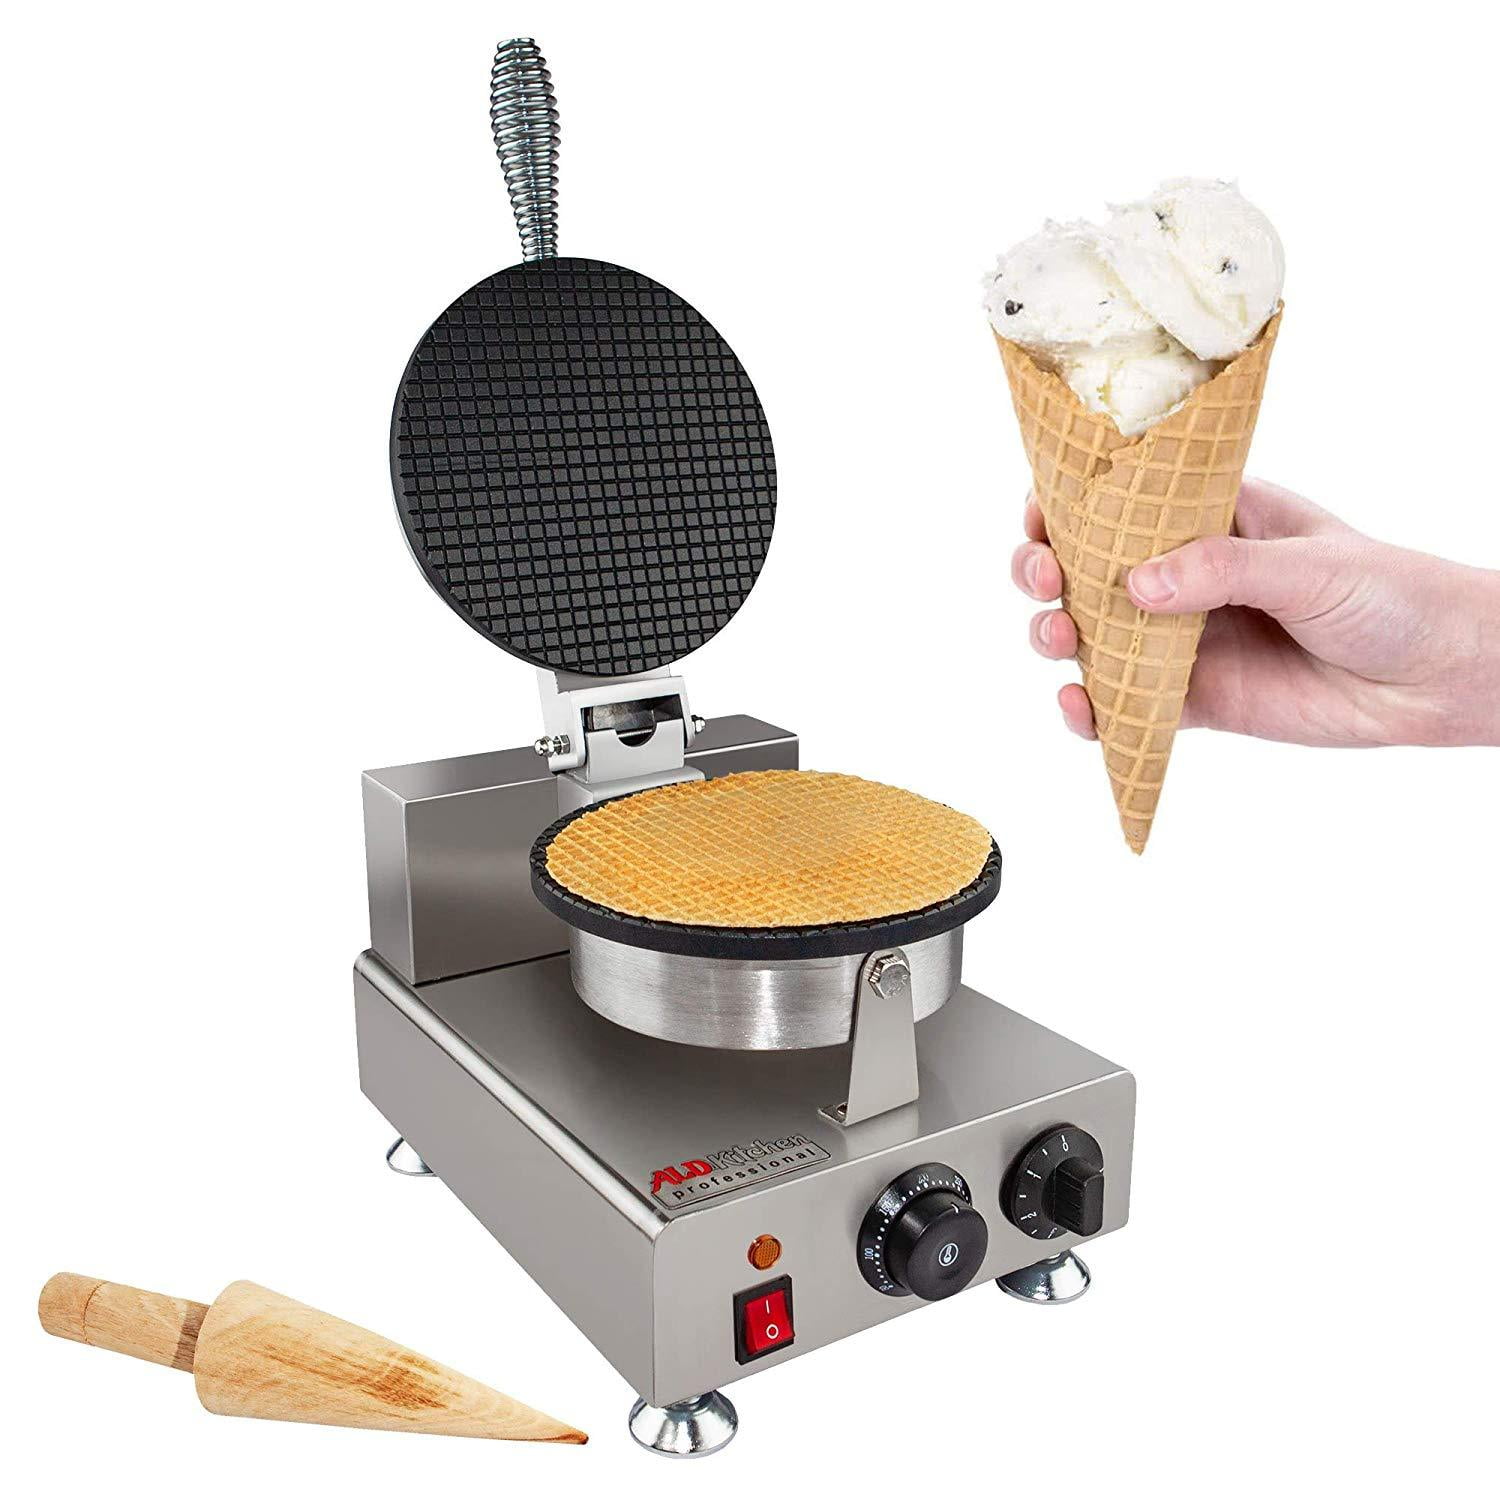 Details about   Brentwood Waffle Cone Maker Sugar Wafer or Waffle Cone w/ Cone Roller & Lights 